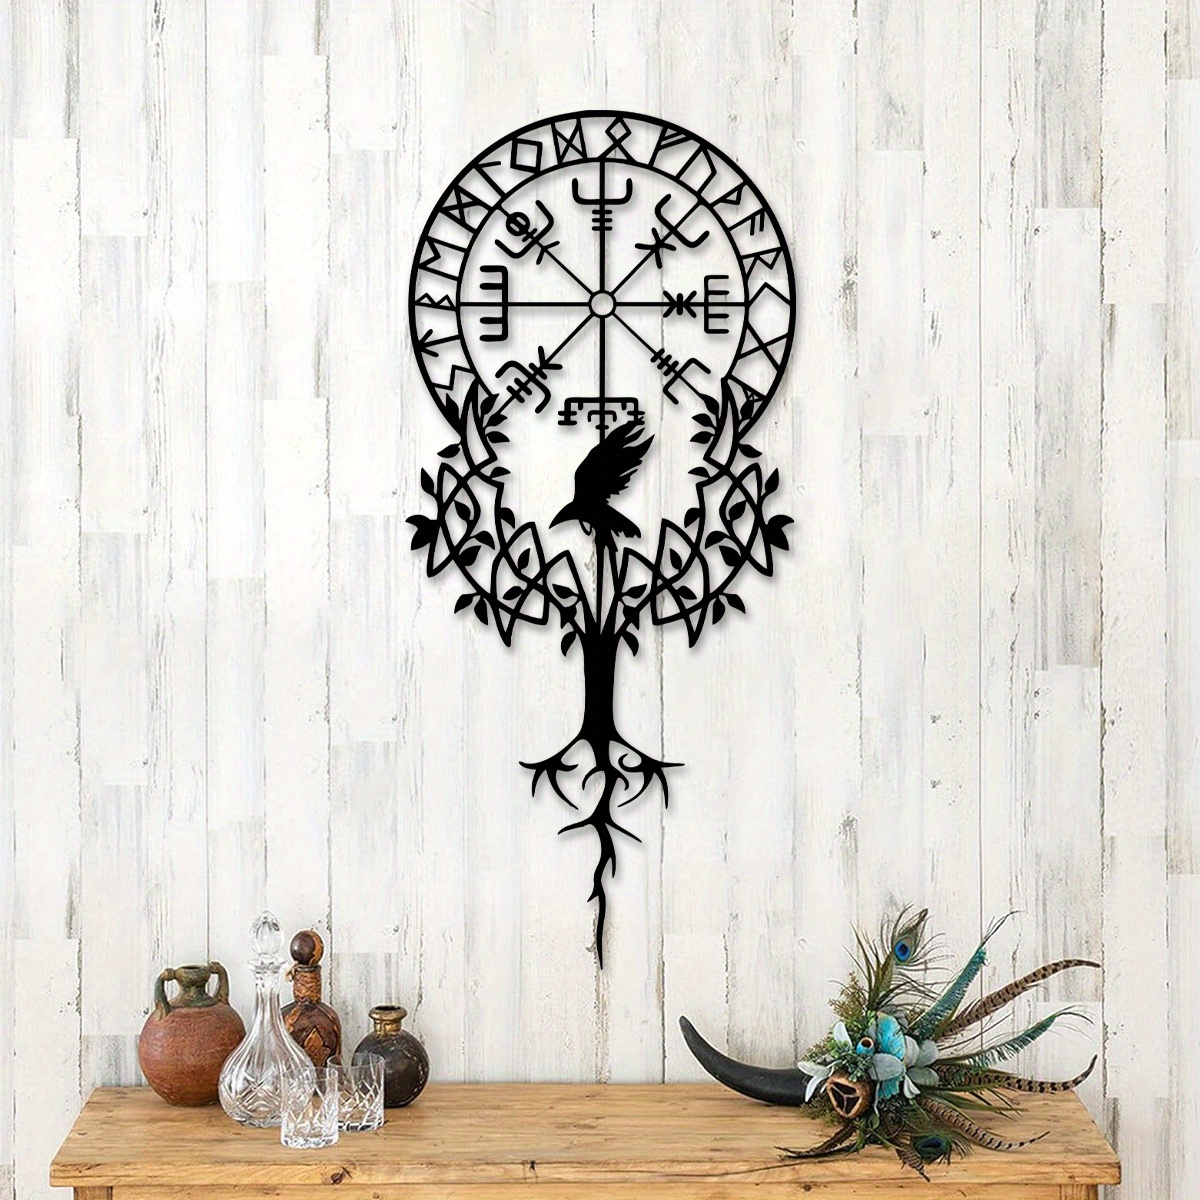 

1pc, Viking Symbol Metal Wall Art, Nordic Decor, Vegvisir Compass, Black Metal Wall Art, Amulet Protection Decor, Viking Gifts, Meaningful Gift 17.3in/44cm